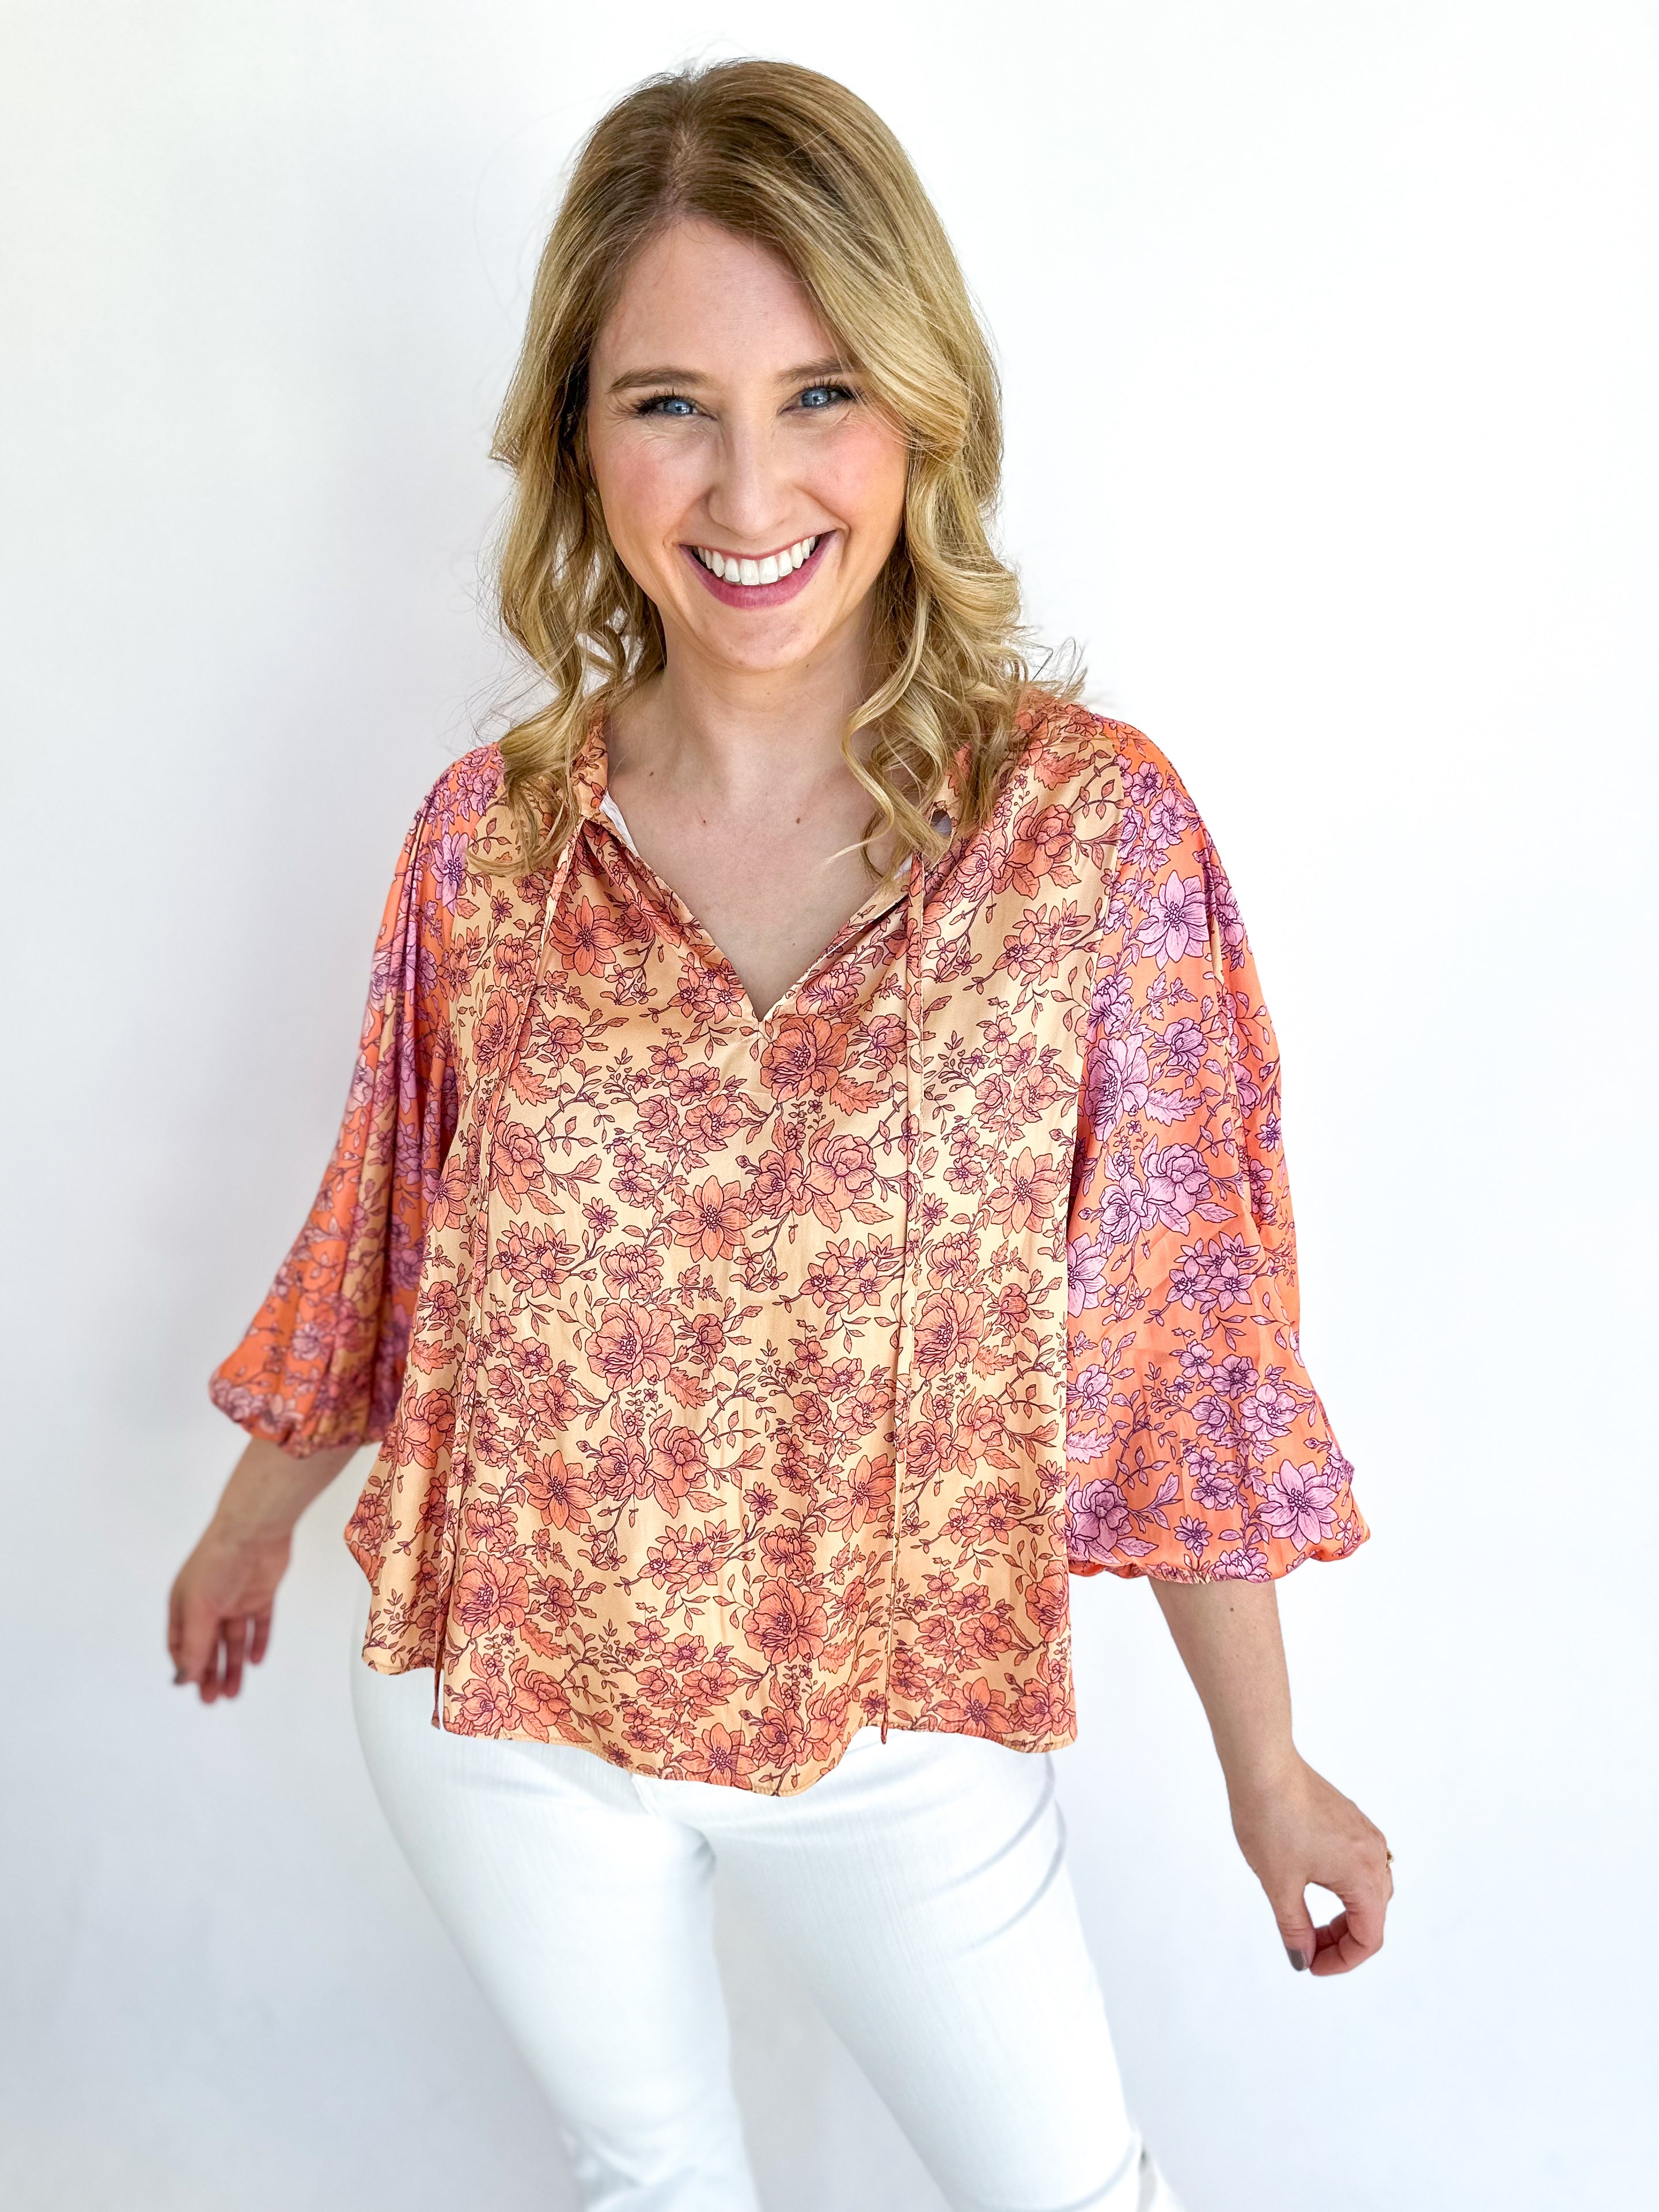 Spring is Coming Blouse - Peach-200 Fashion Blouses-CURRENT AIR CLOTHING-July & June Women's Fashion Boutique Located in San Antonio, Texas